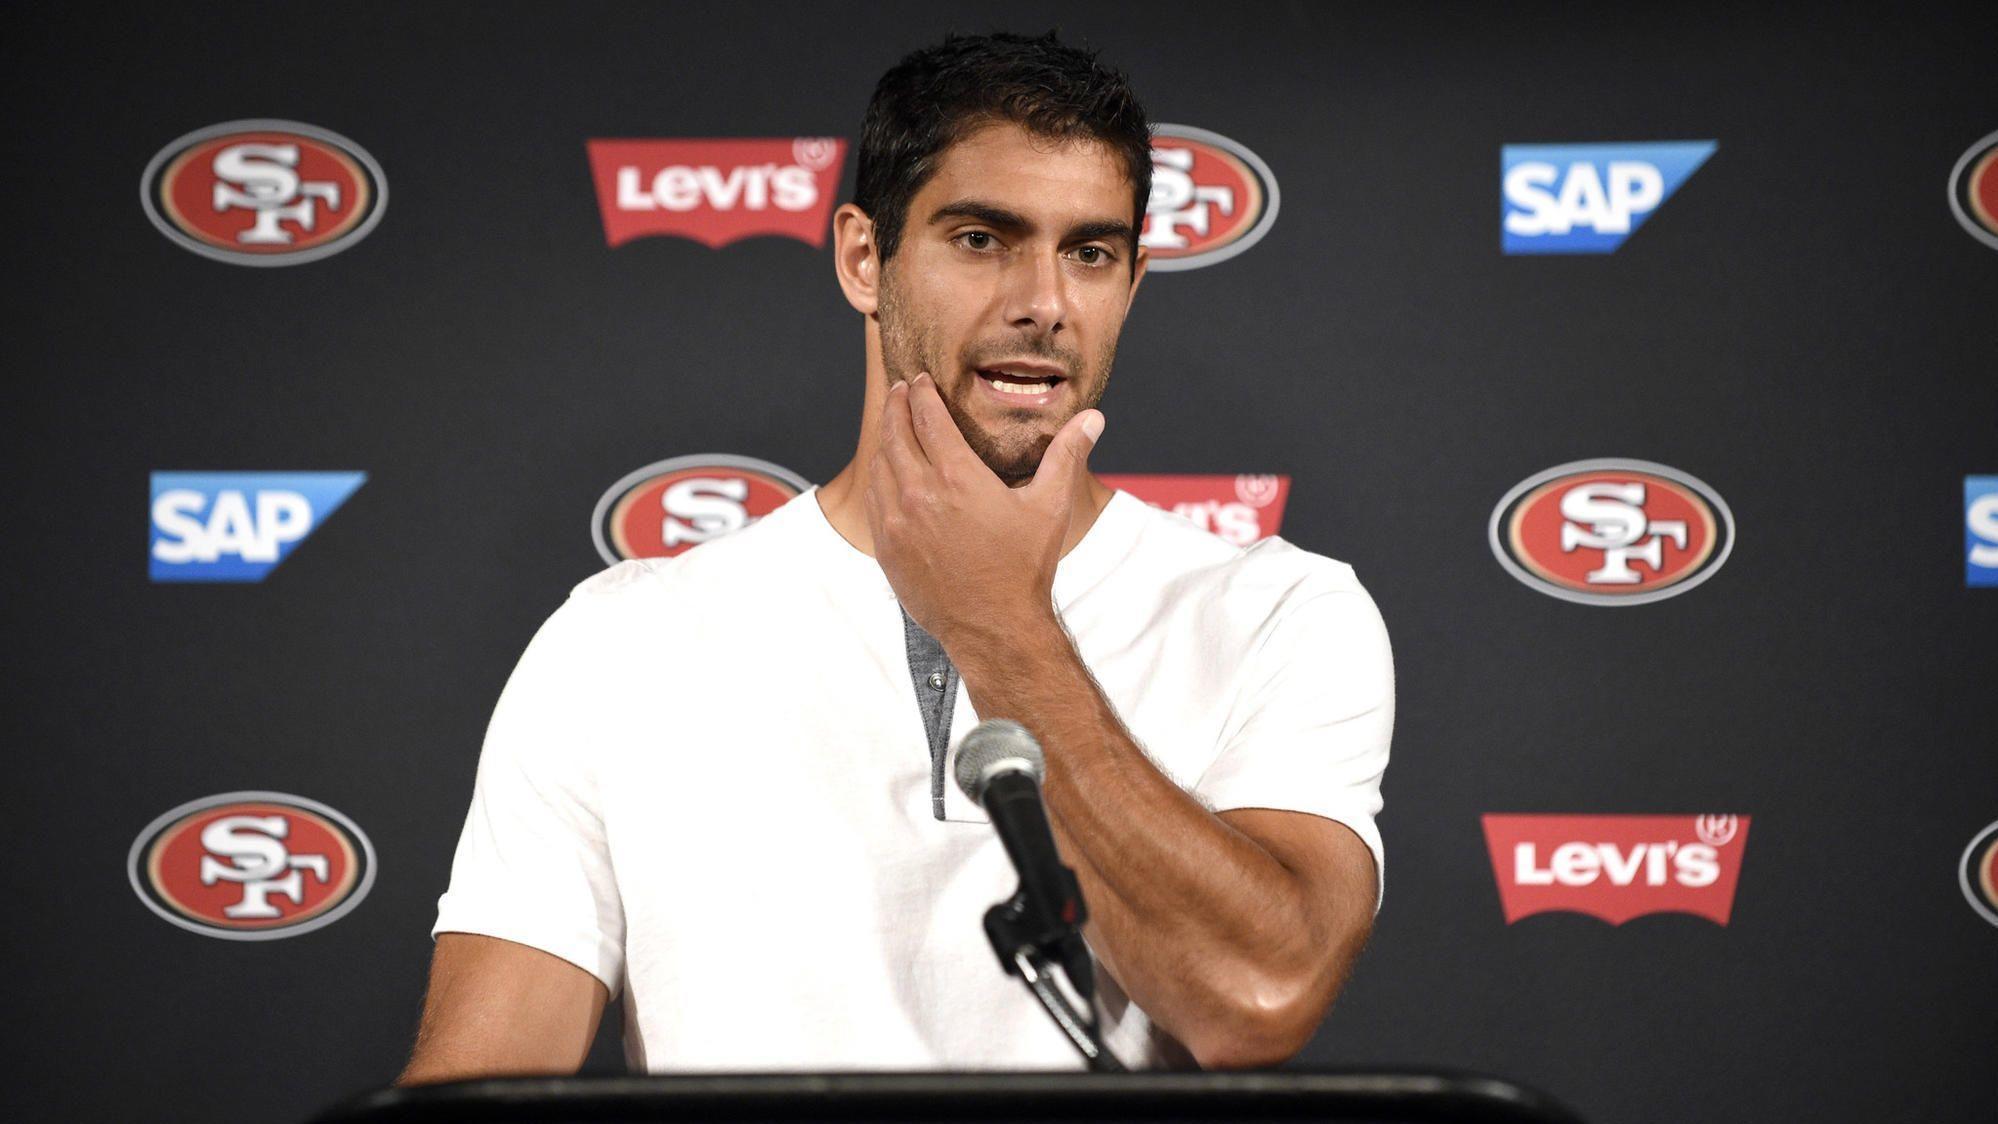 Can suburban Chicago native Jimmy Garoppolo become the face of the NFL